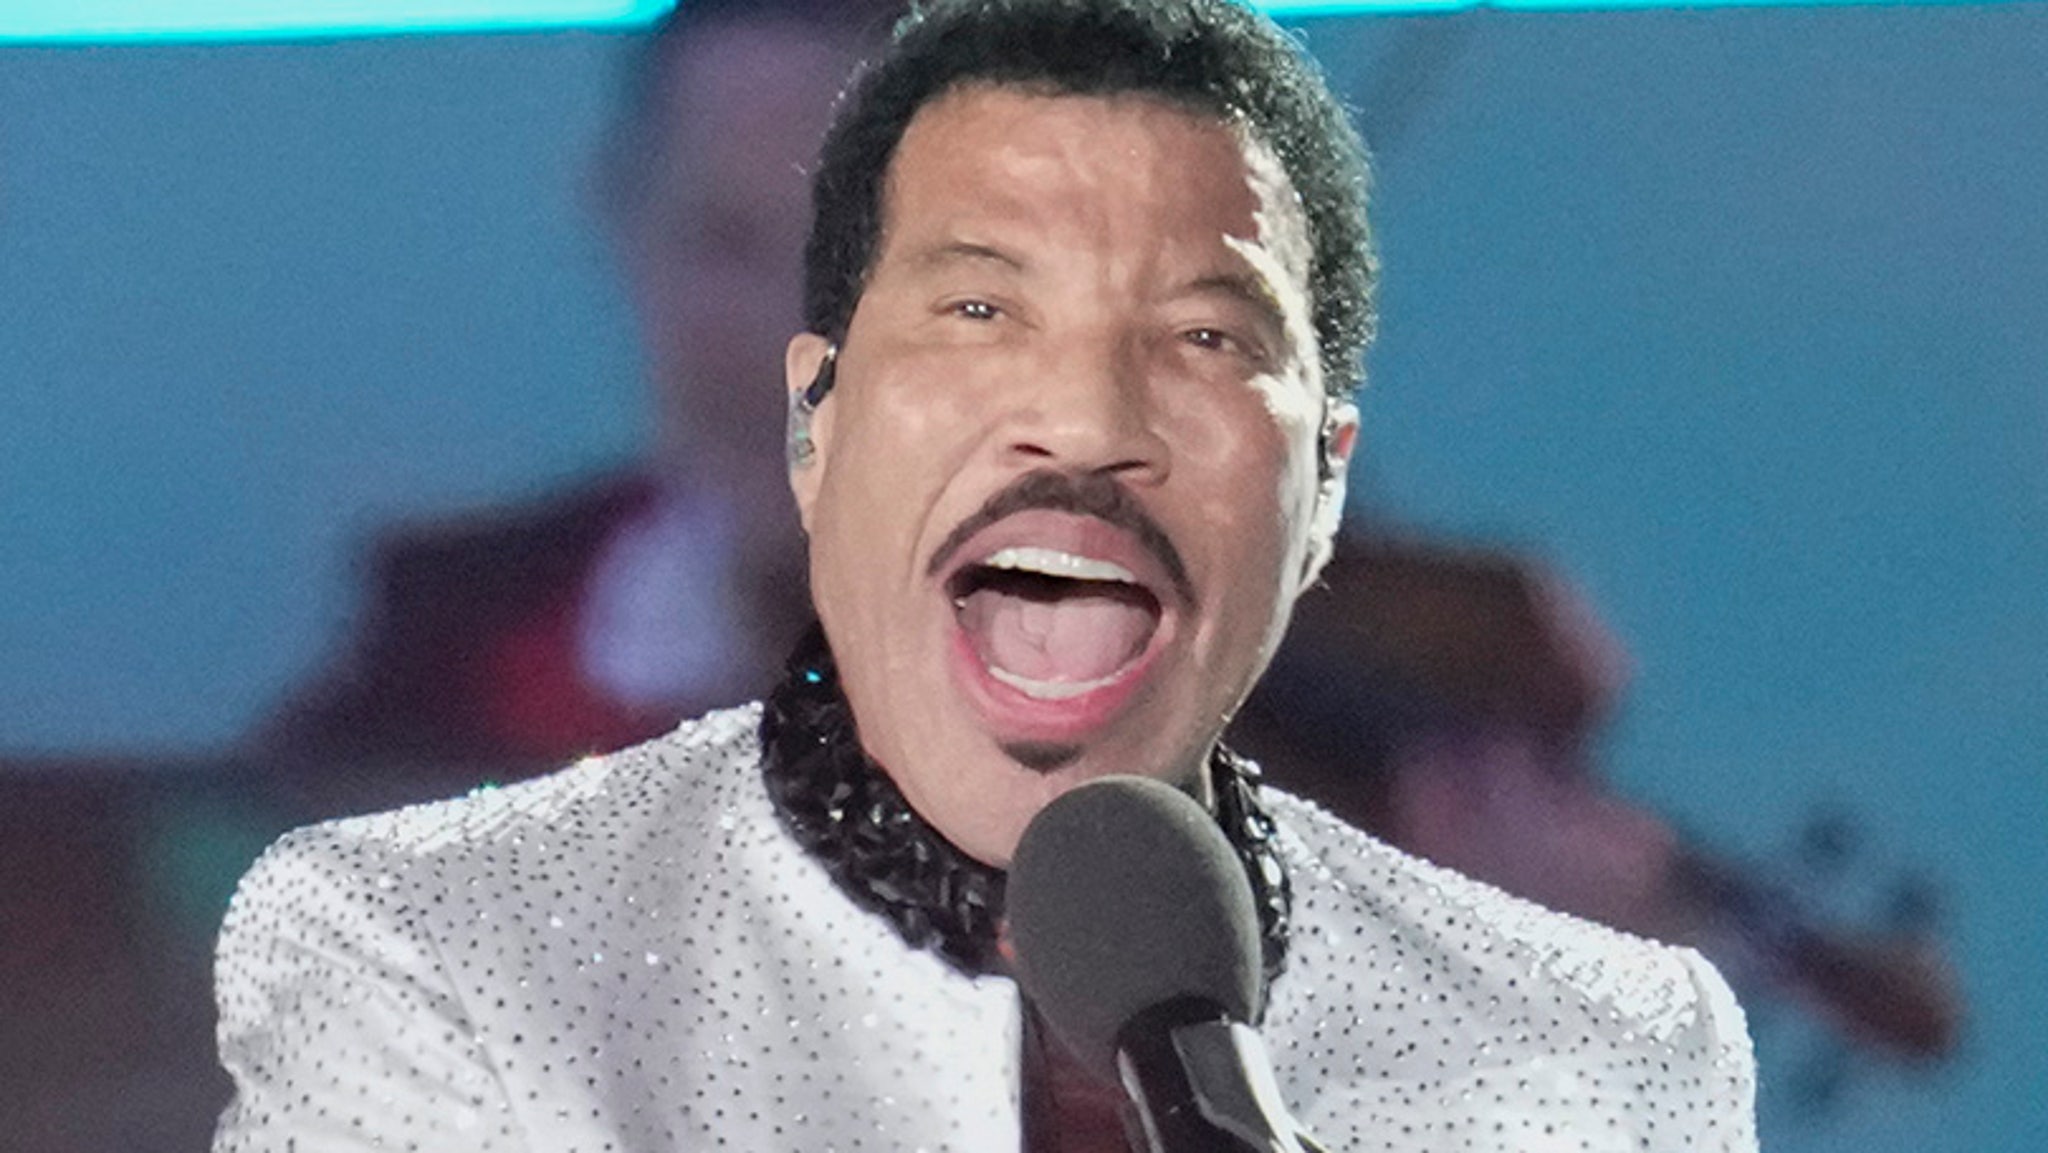 Lionel Richie Claps Back at Plastic Surgery Claims, Credits Youthful Looks to Water, Sleep, Sex